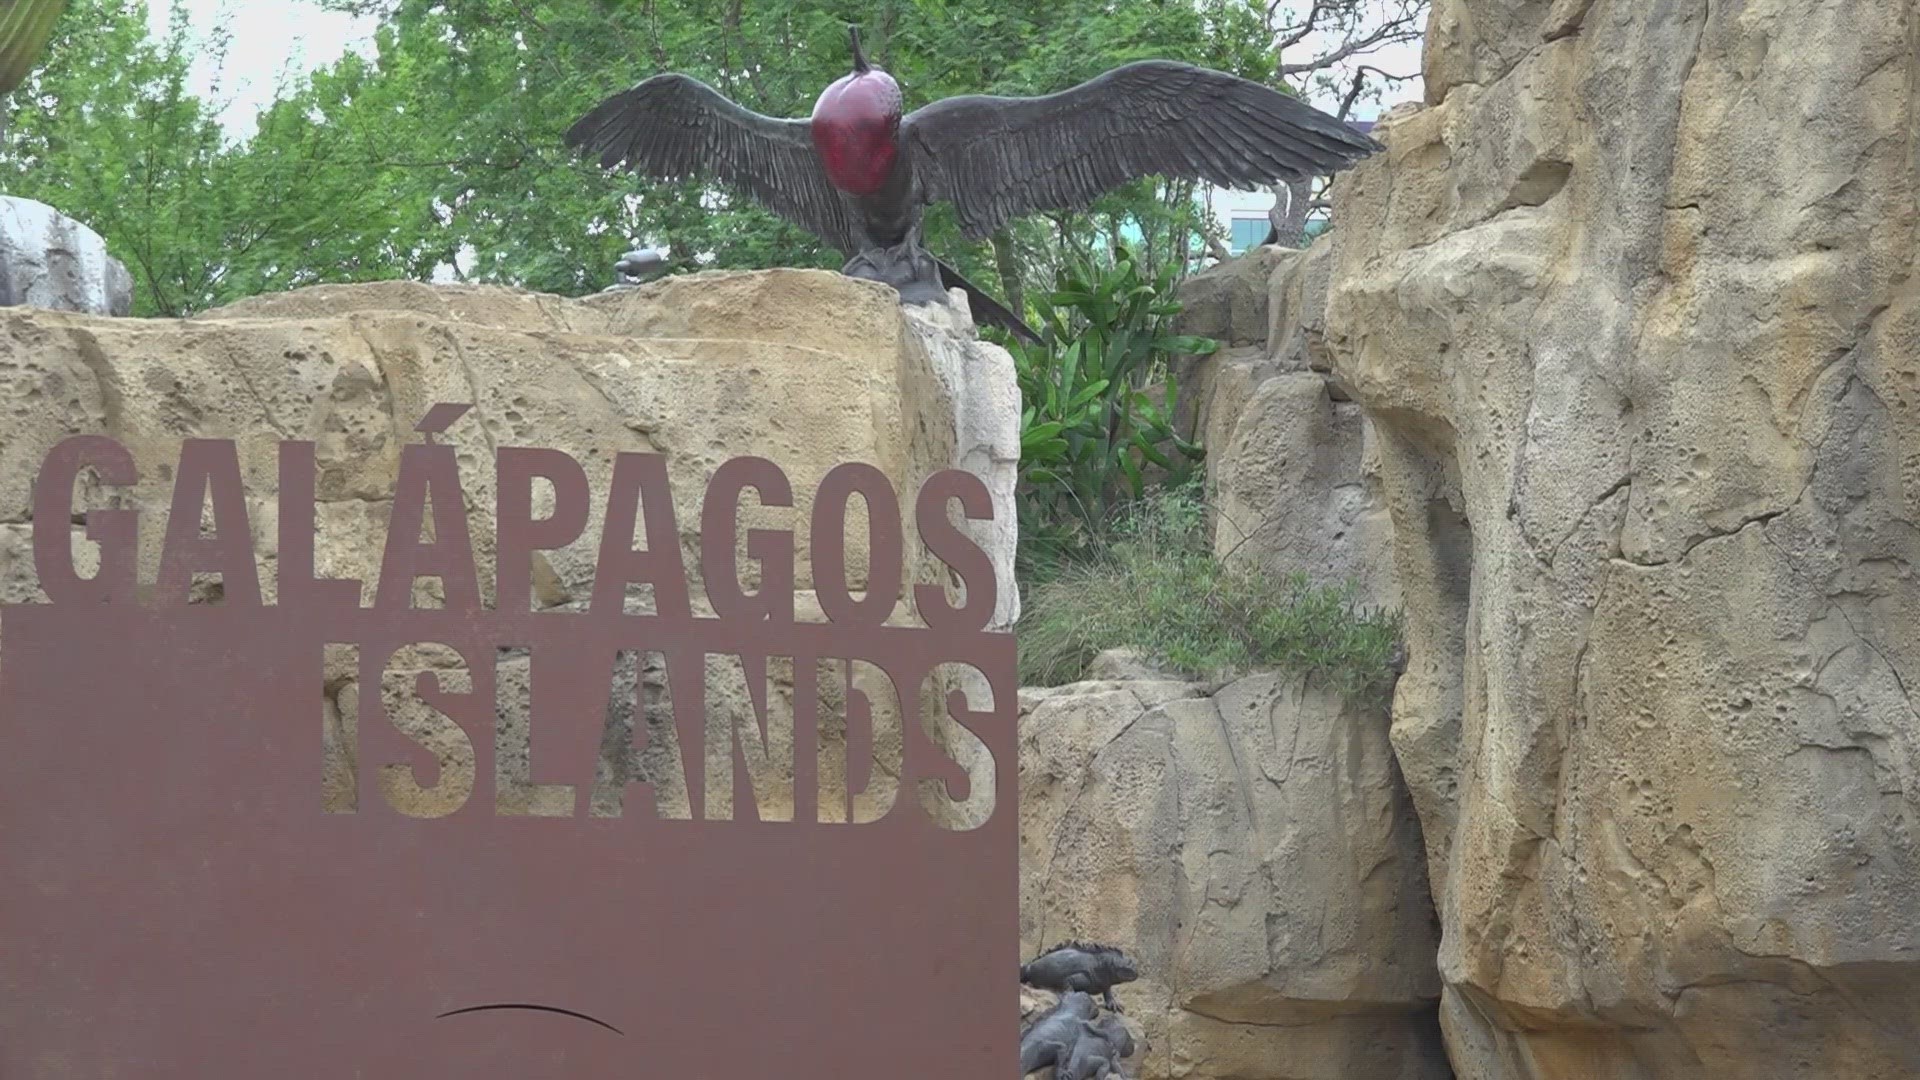 The $70M, six-year project is "the first major exhibit of its kind to showcase the remarkable wildlife of the legendary island chain," according to the zoo.